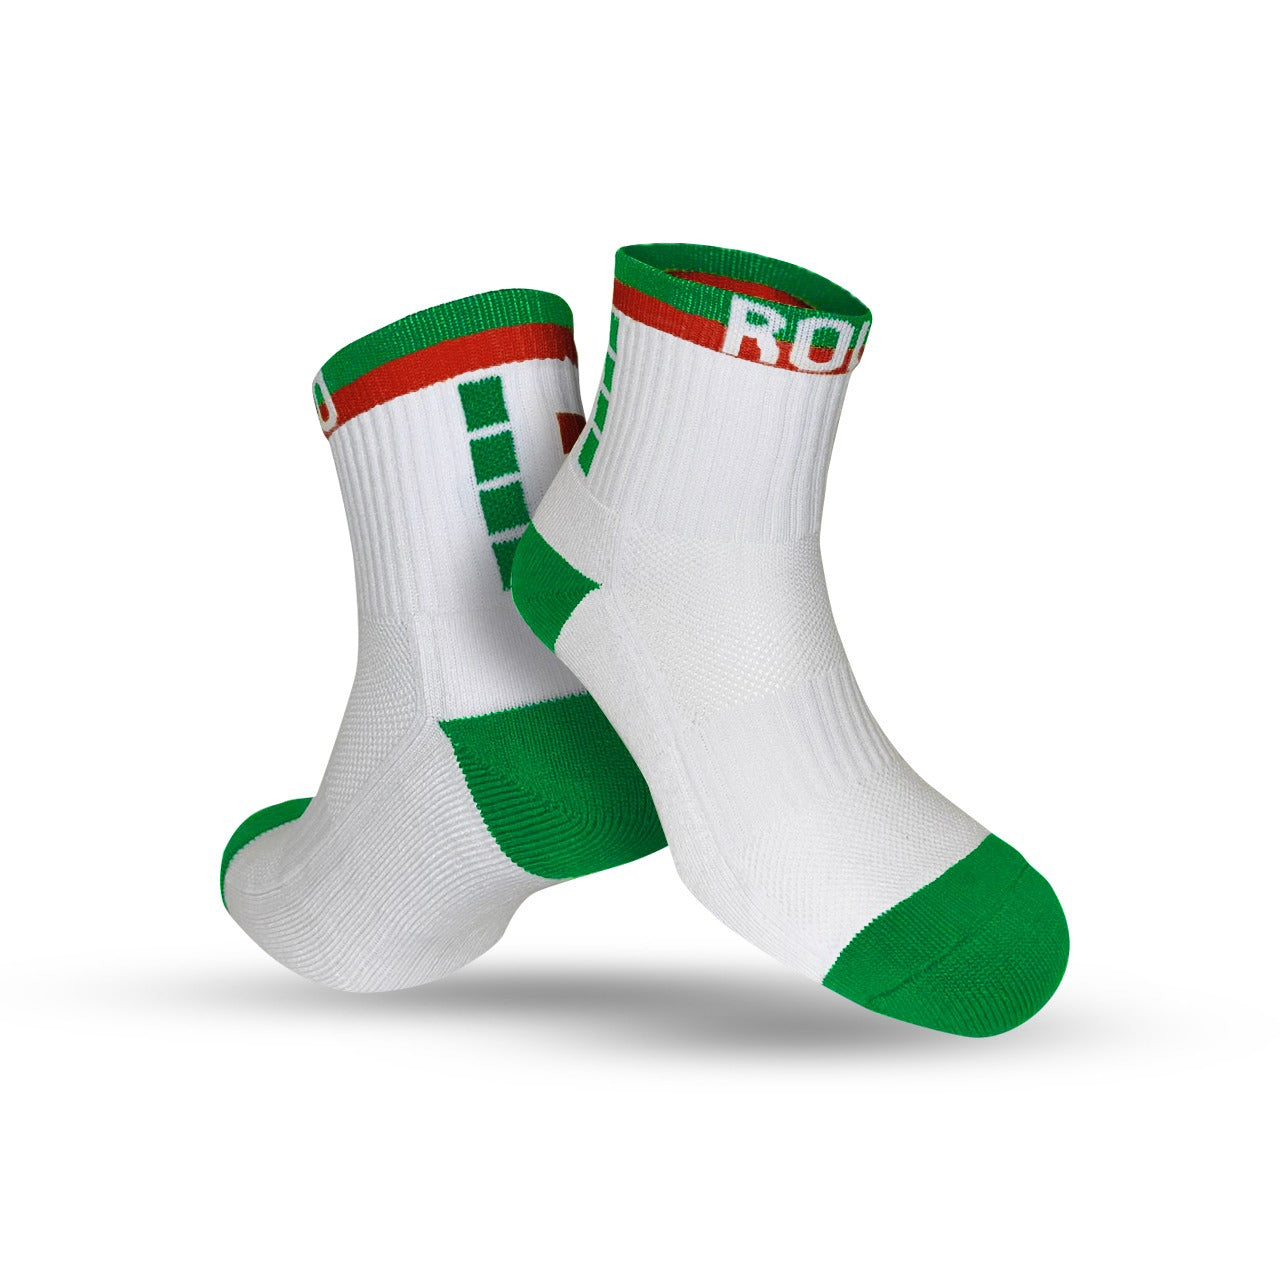 Low Rise Cushioned Ankle Socks - Green/Red/White